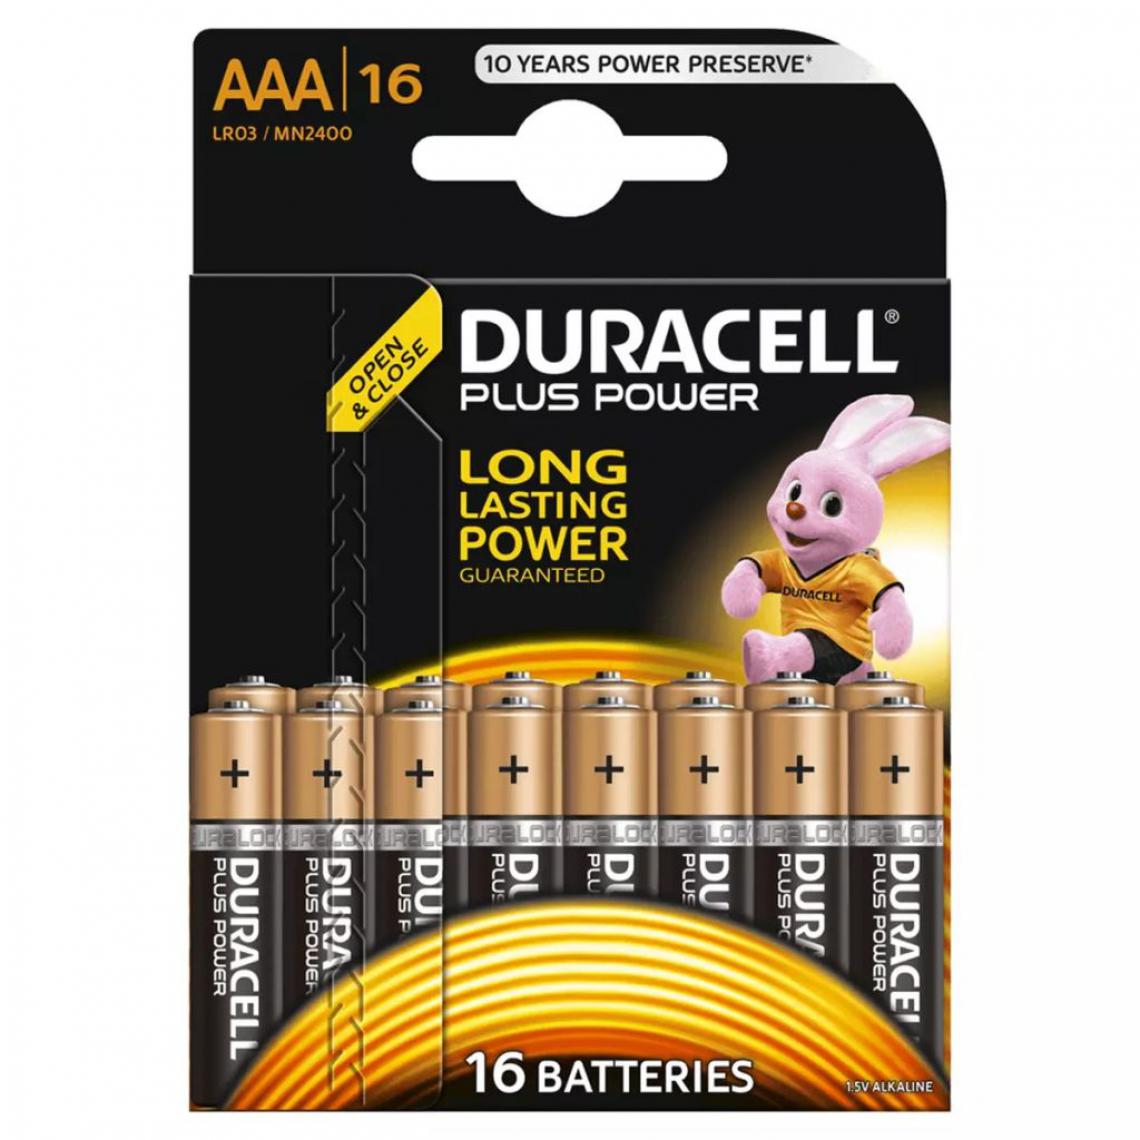 Duracell - Duracell Piles alcalines AAA Plus Power 16 pcs - Piles rechargeables